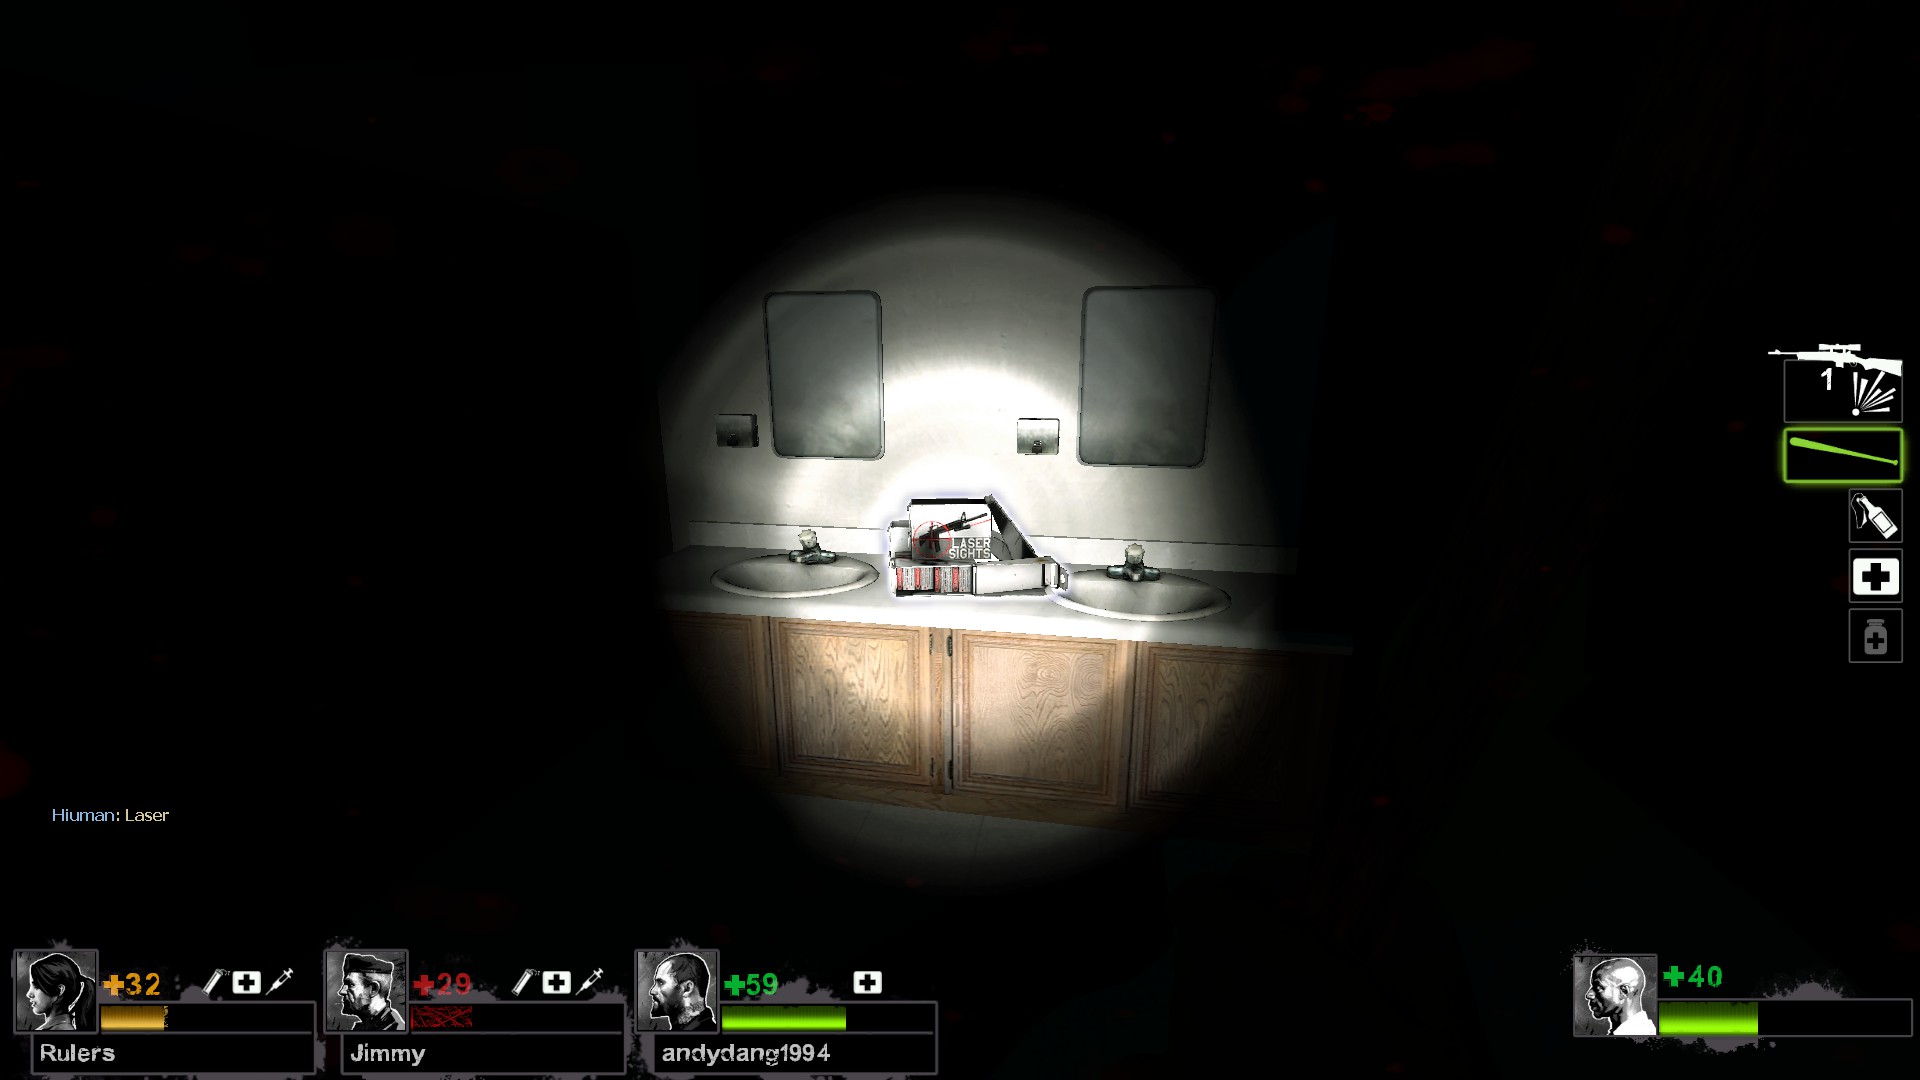 Left 4 Dead 2 - Detailed Guide for All Laser Sight Locations in Game - Map Guide - Potential spots, L4D1 maps - 3452934